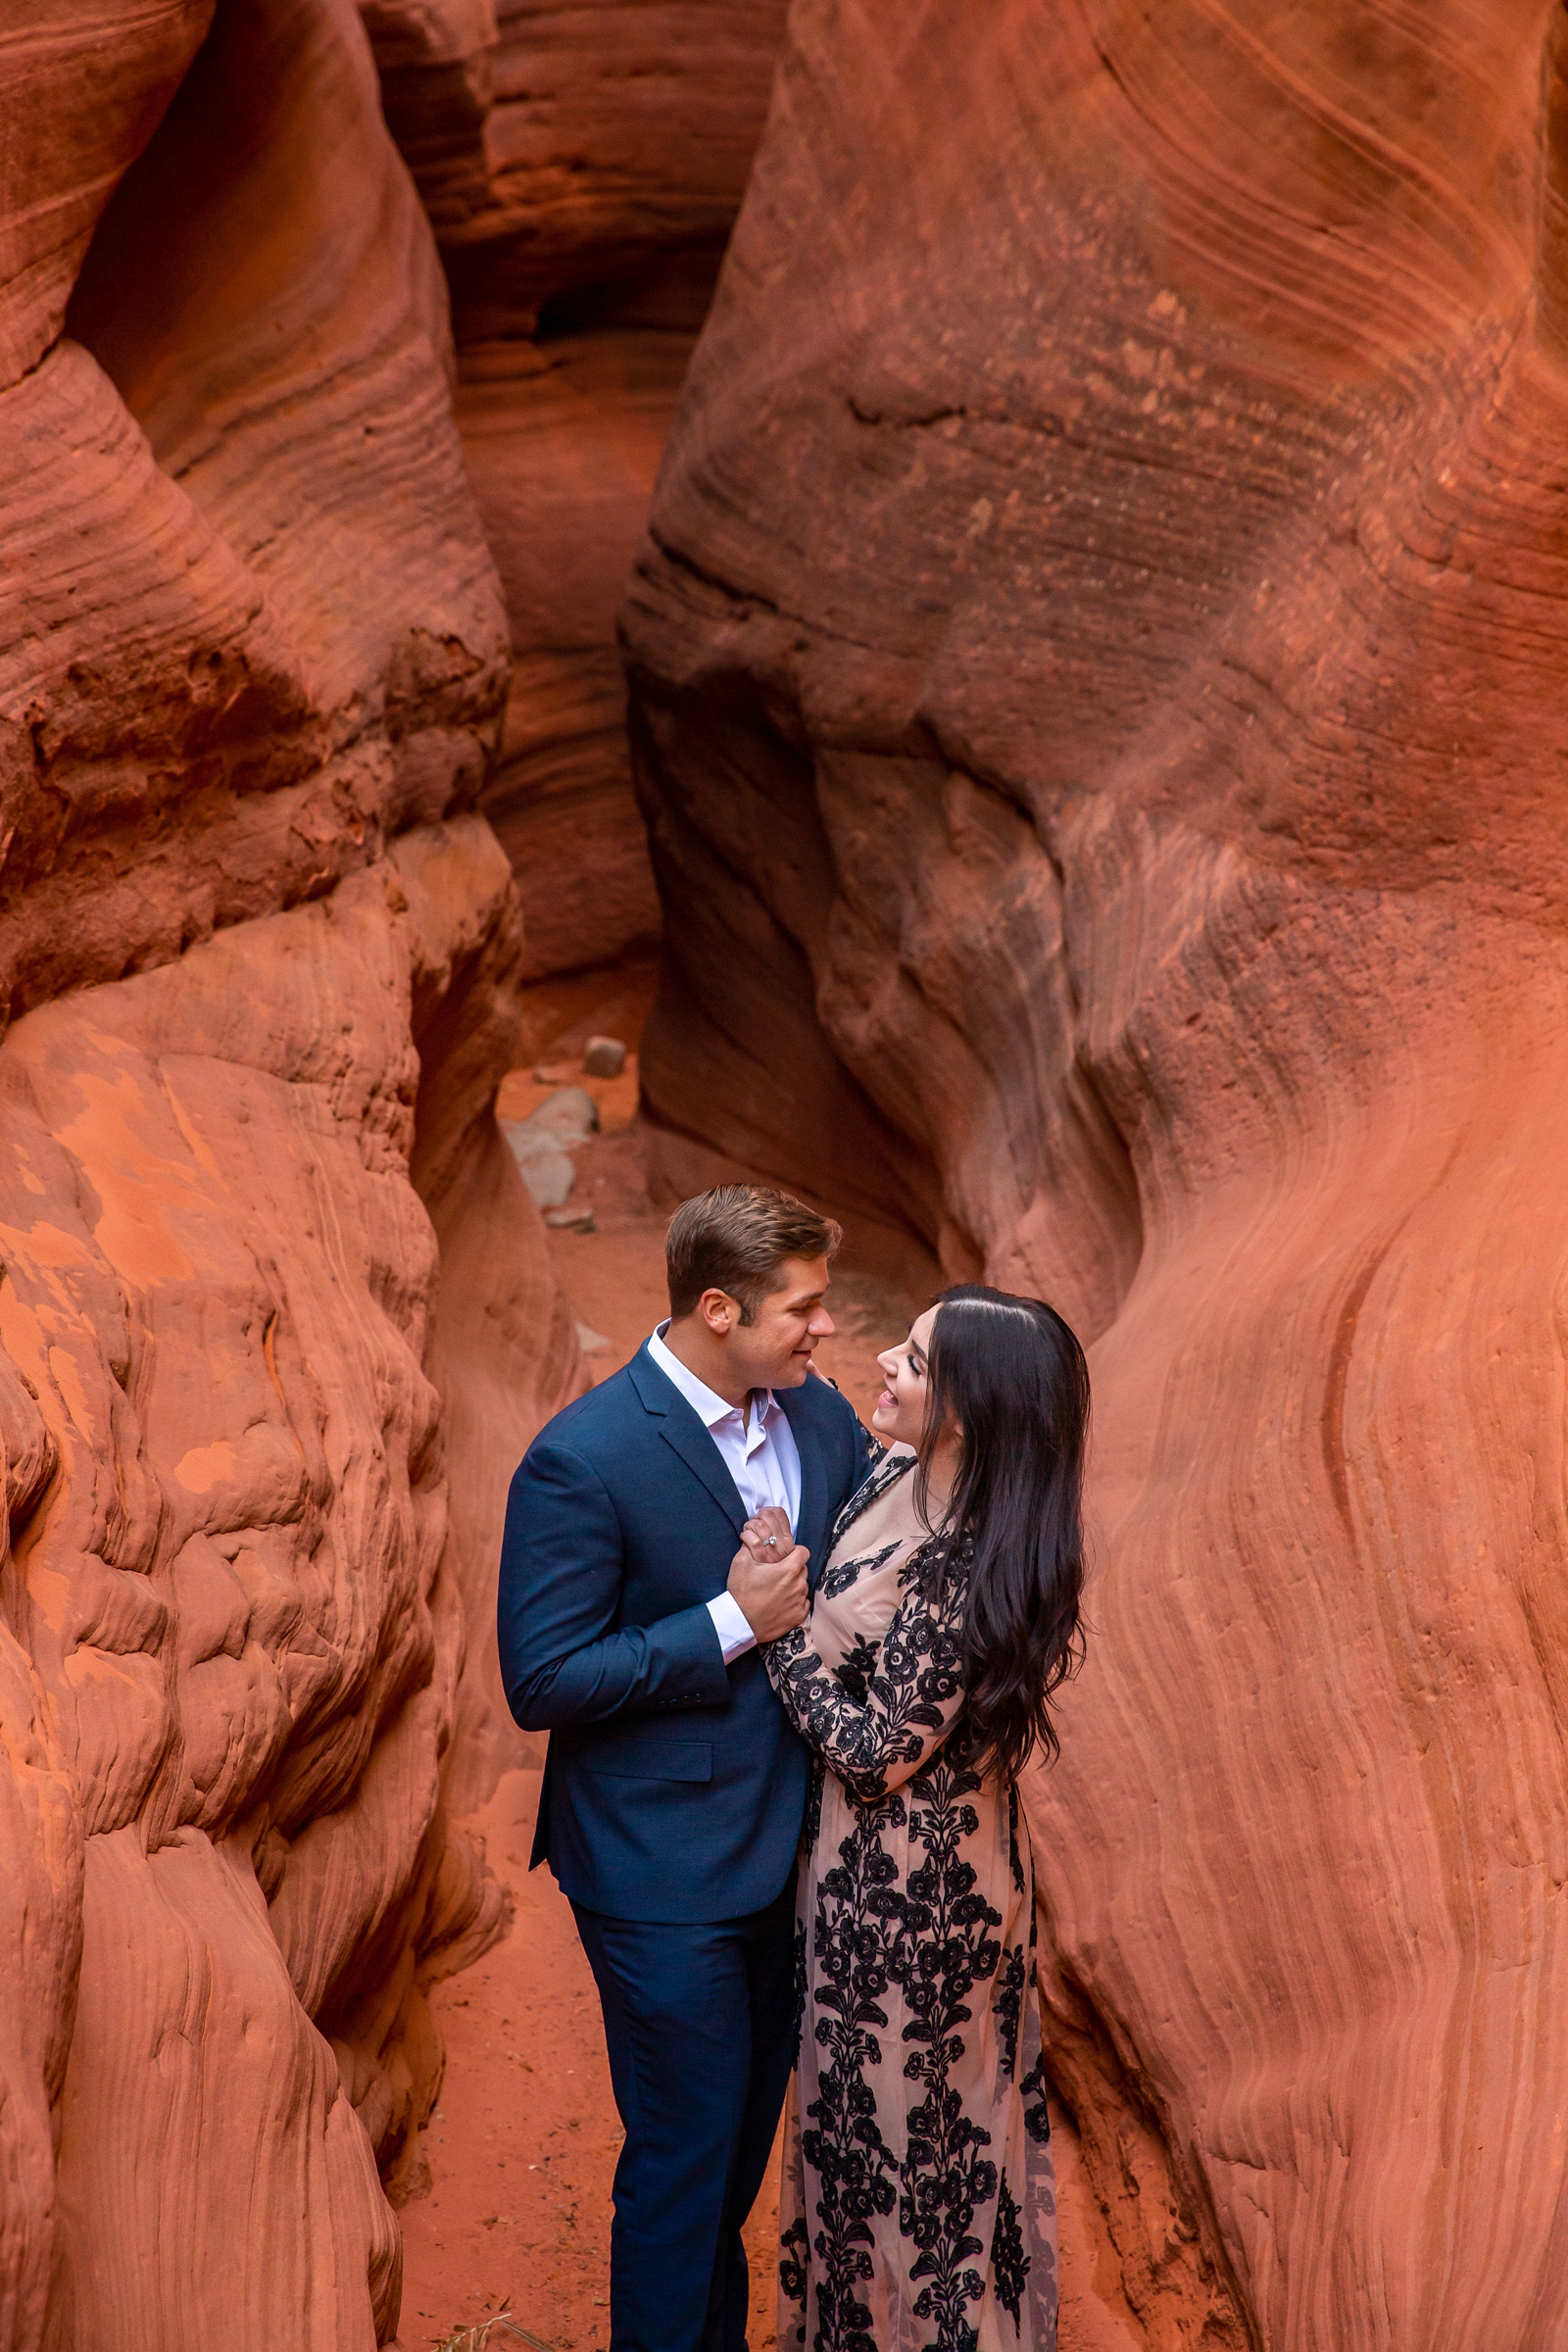 Fun engaged couple dancing in a red rock slot canyon.